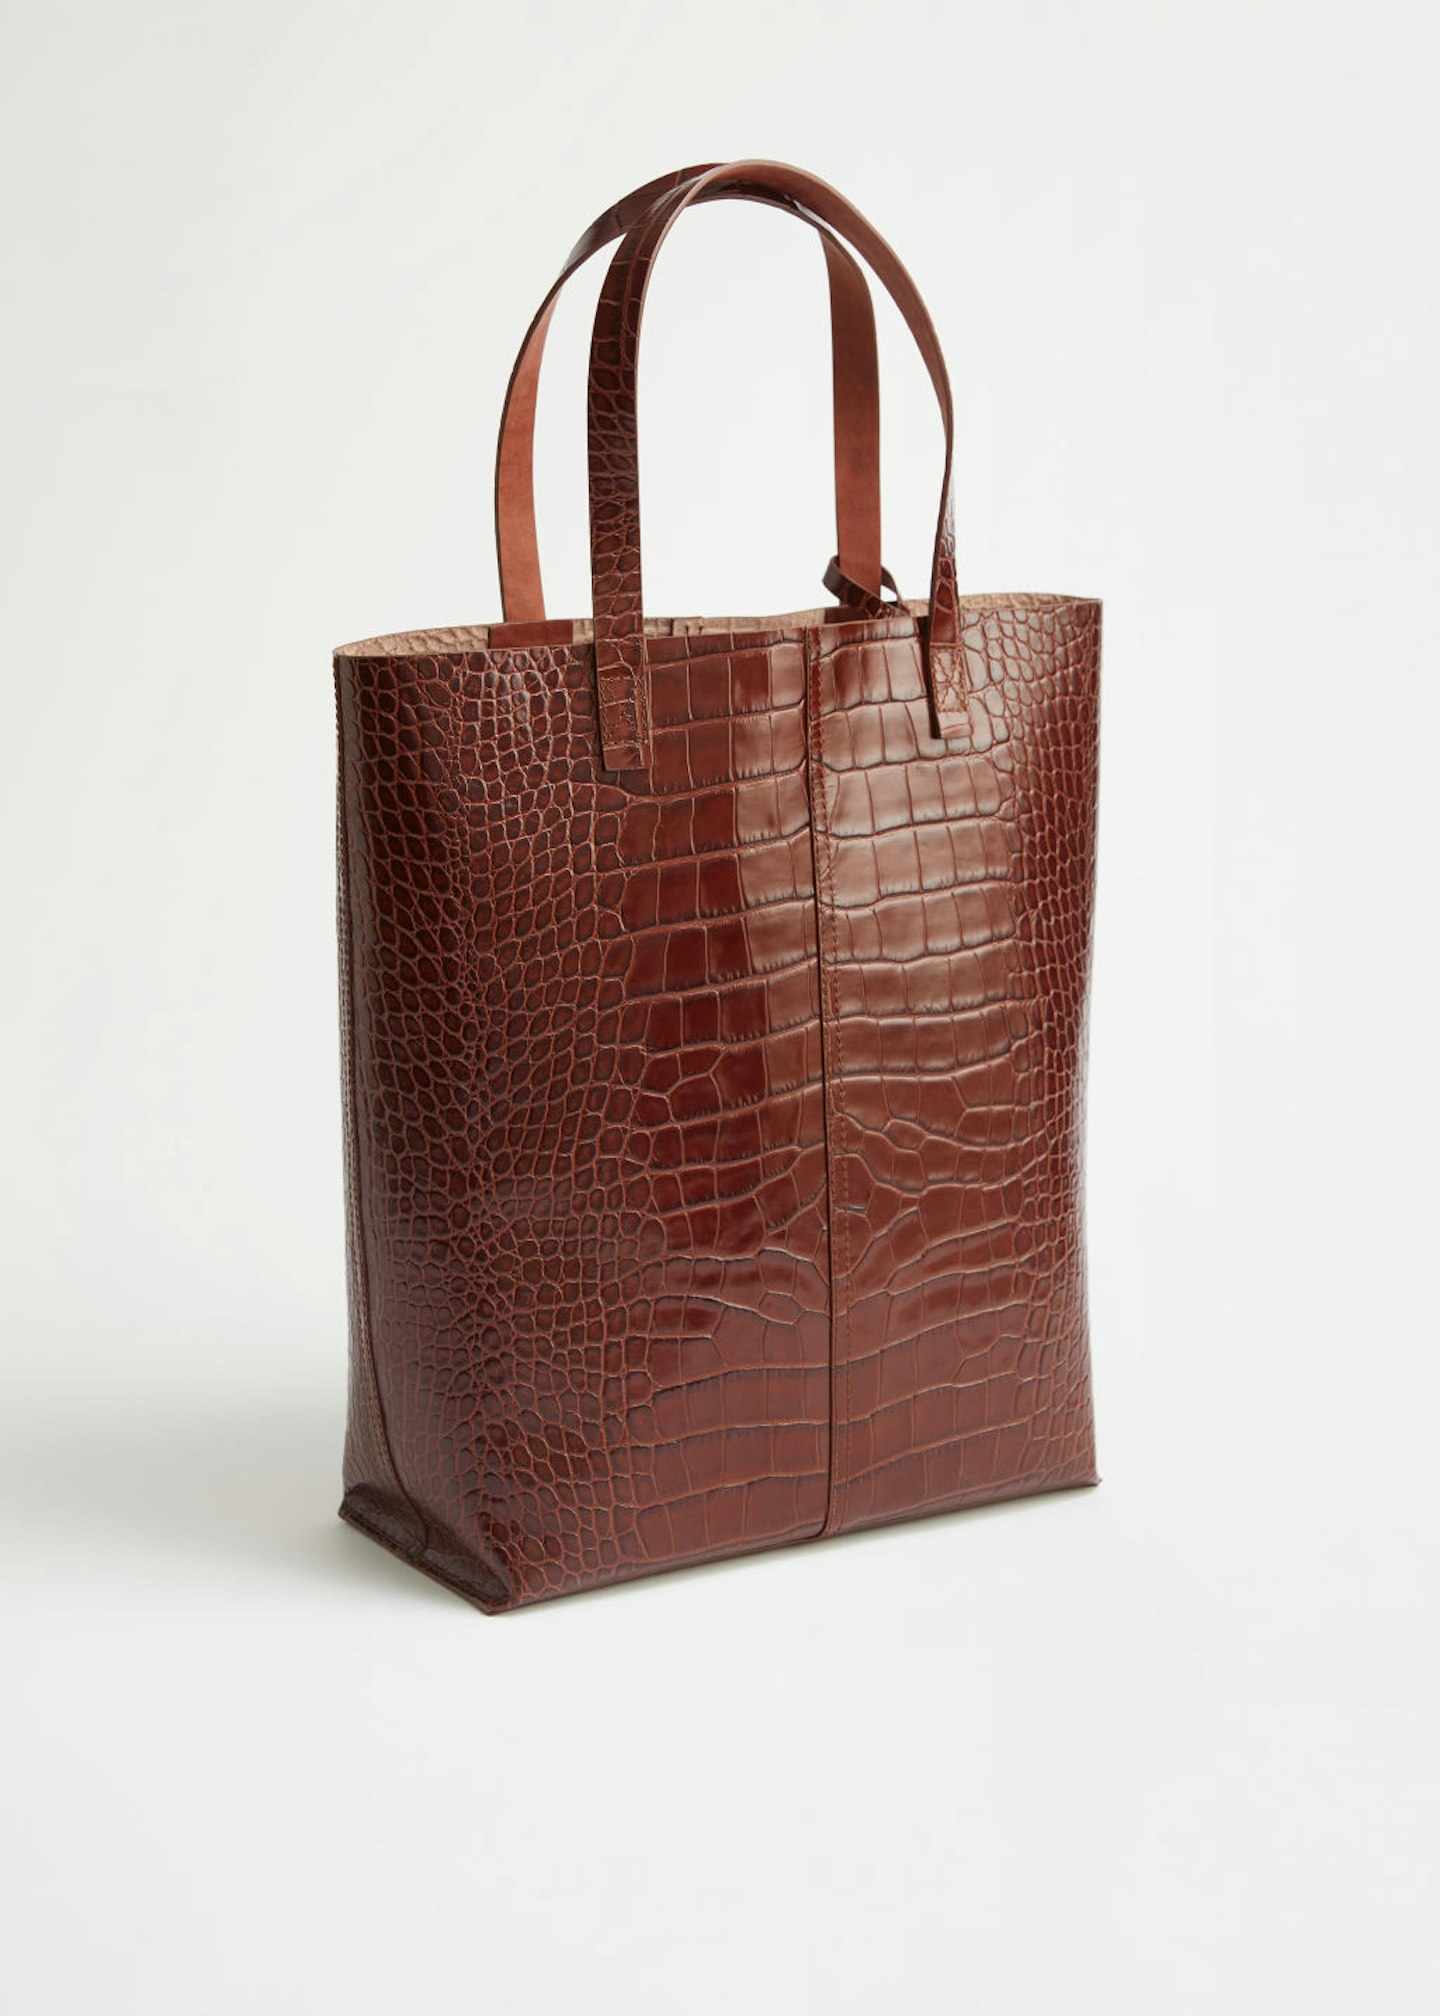 & Other Stories, Croc Embossed Leather Tote Bag, £145